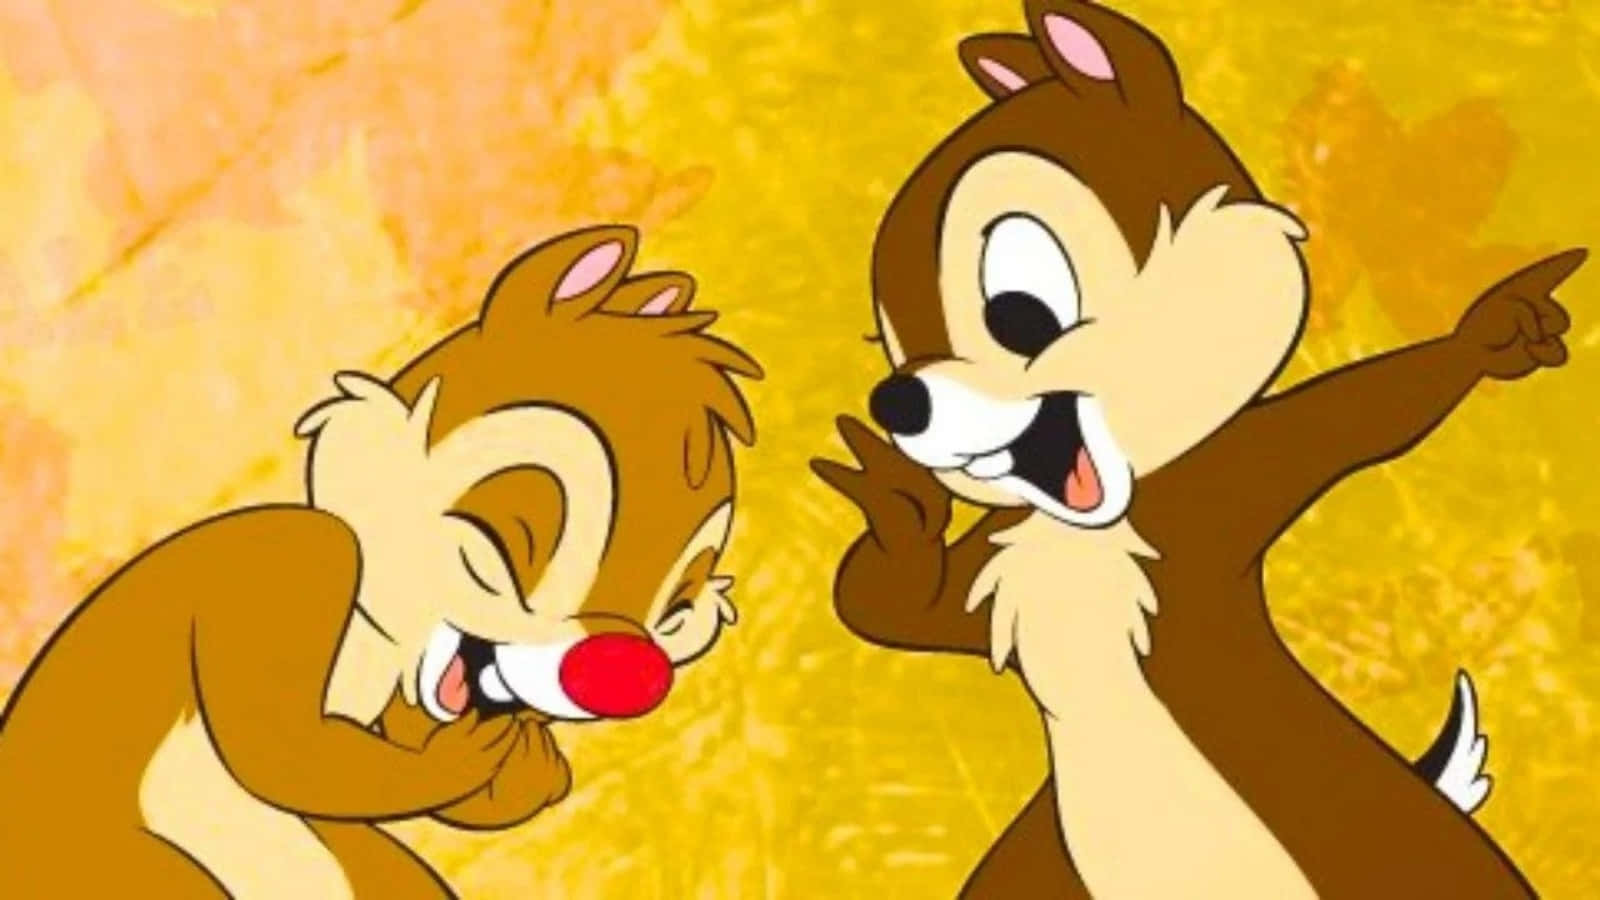 Chip and Dale show off their harmonizing skills